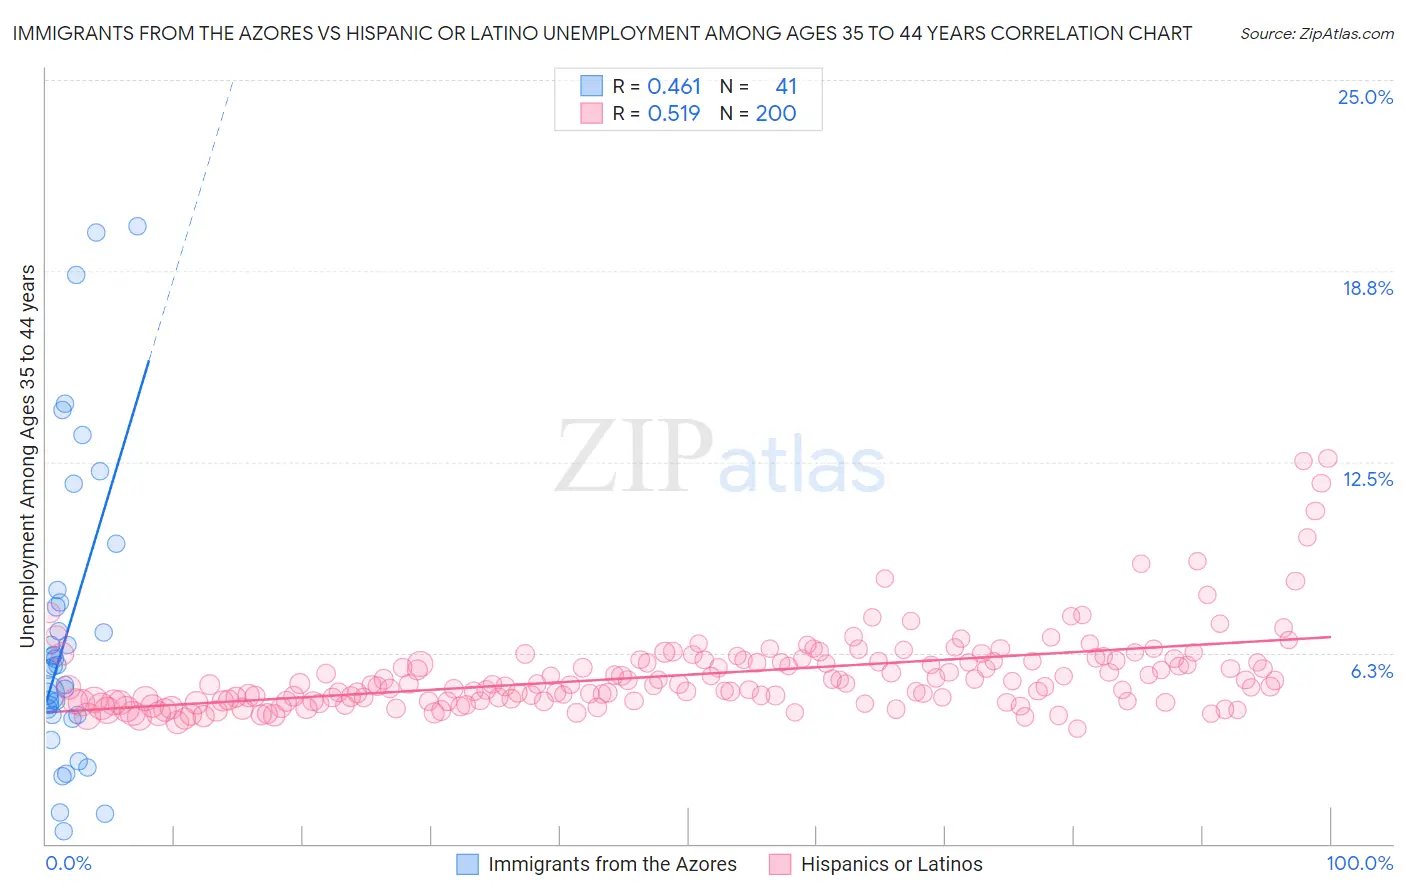 Immigrants from the Azores vs Hispanic or Latino Unemployment Among Ages 35 to 44 years